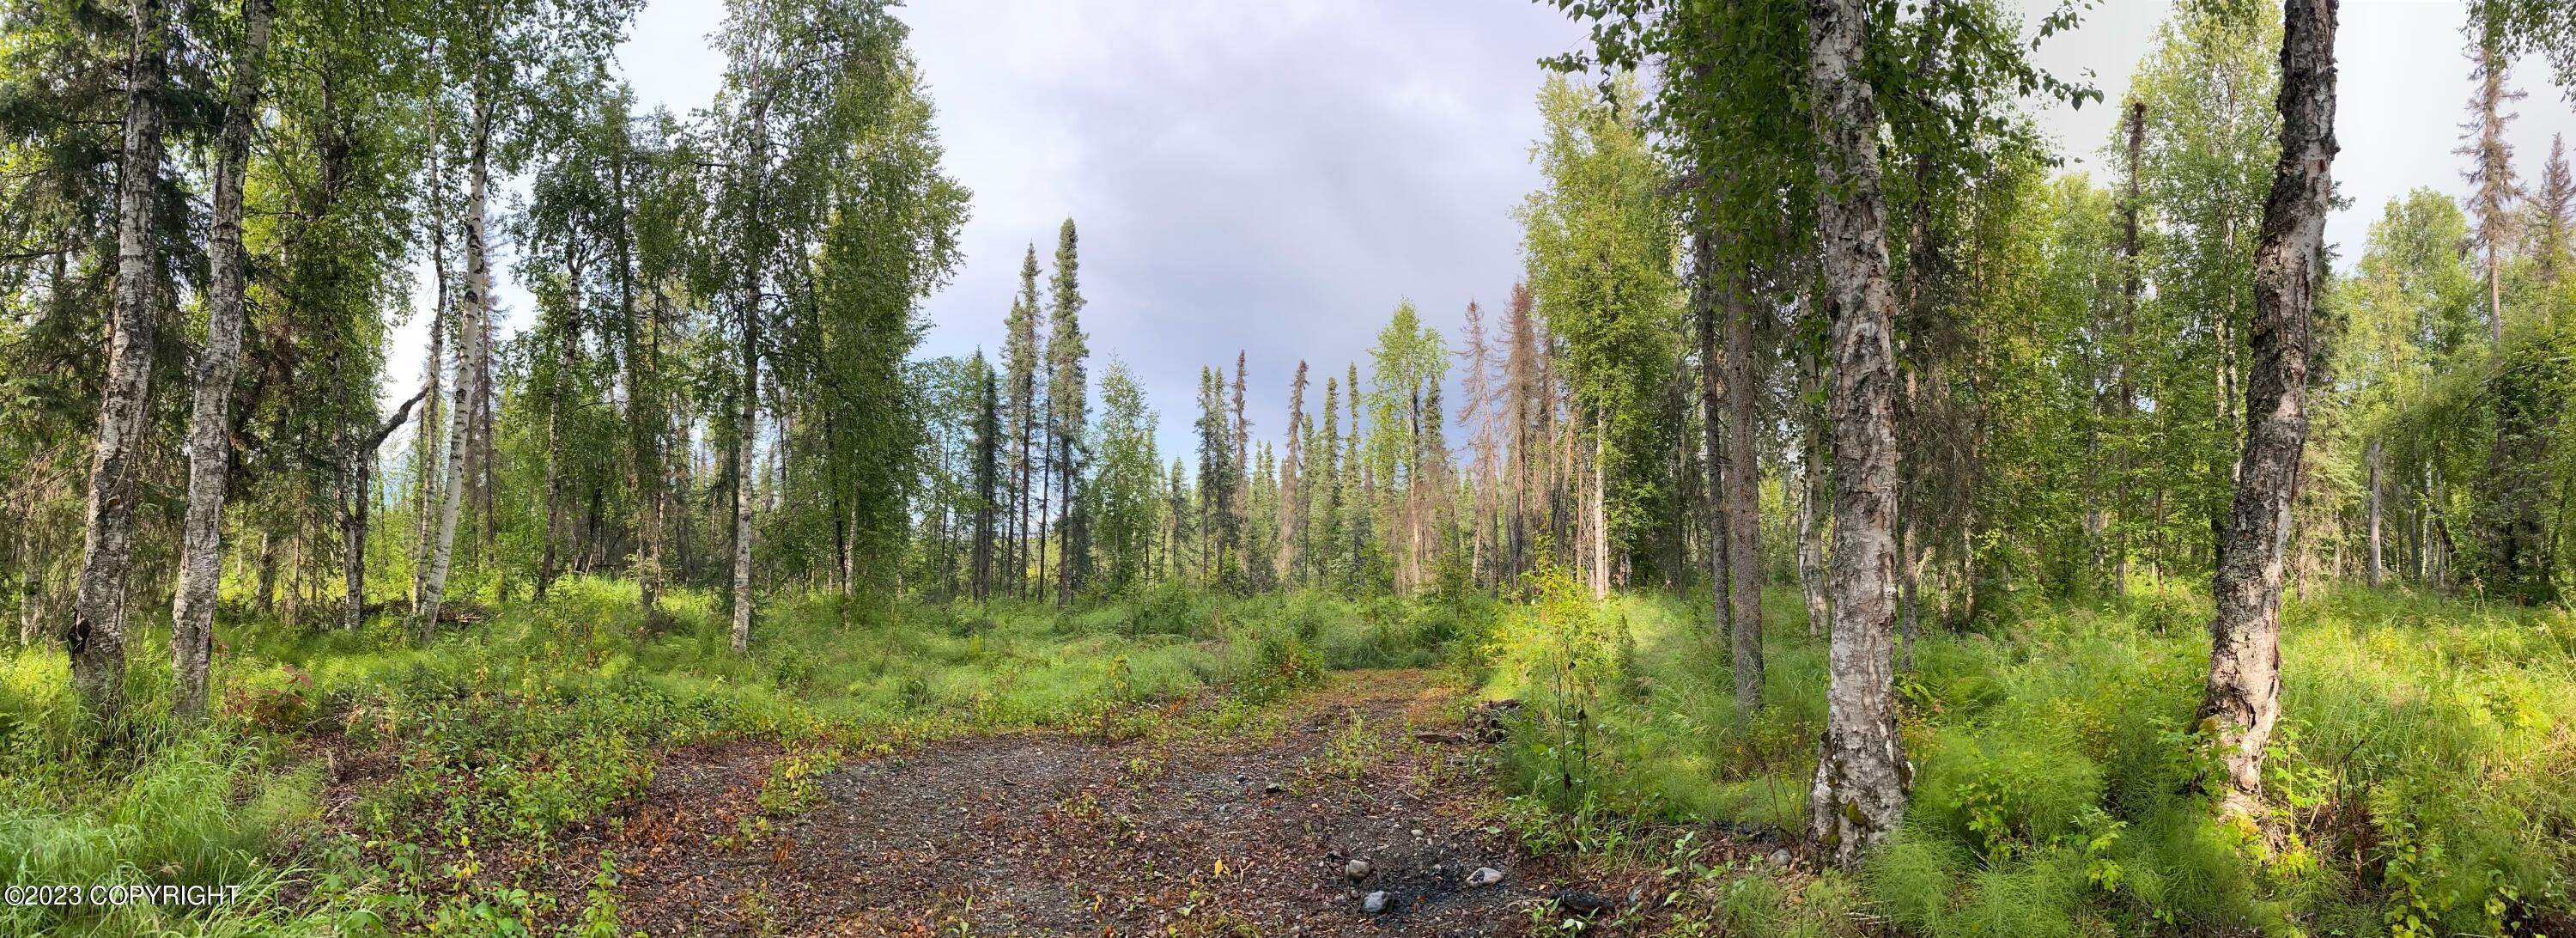 5. Land for Sale at 49395 S Noahs Circle Willow, Alaska 99688 United States